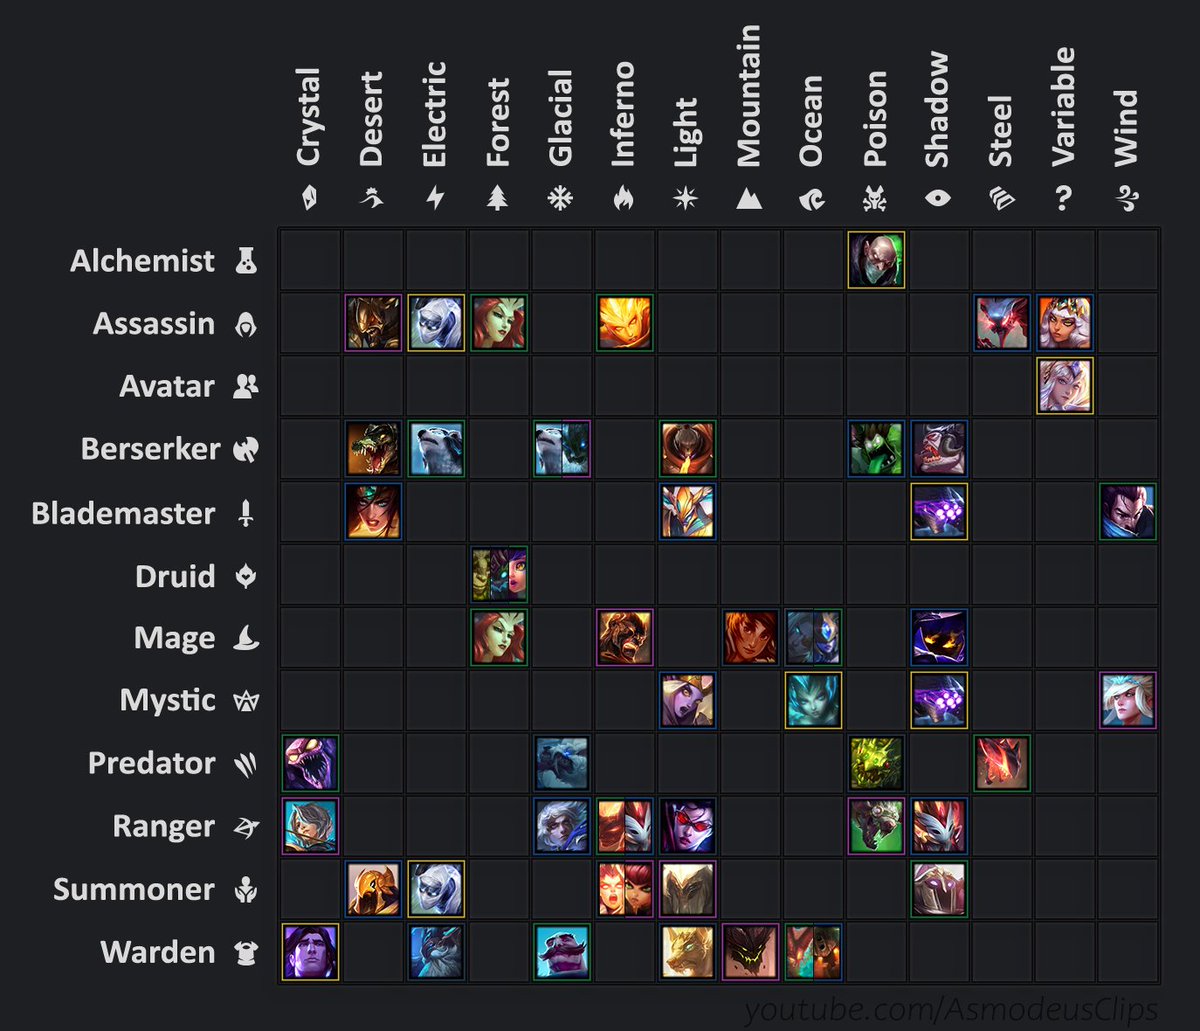 Asmodeus I Made A Champion Cheat Sheet For The Set 2 Of Tft Feel Free To Use It T Co V9rgbi5elm Twitter